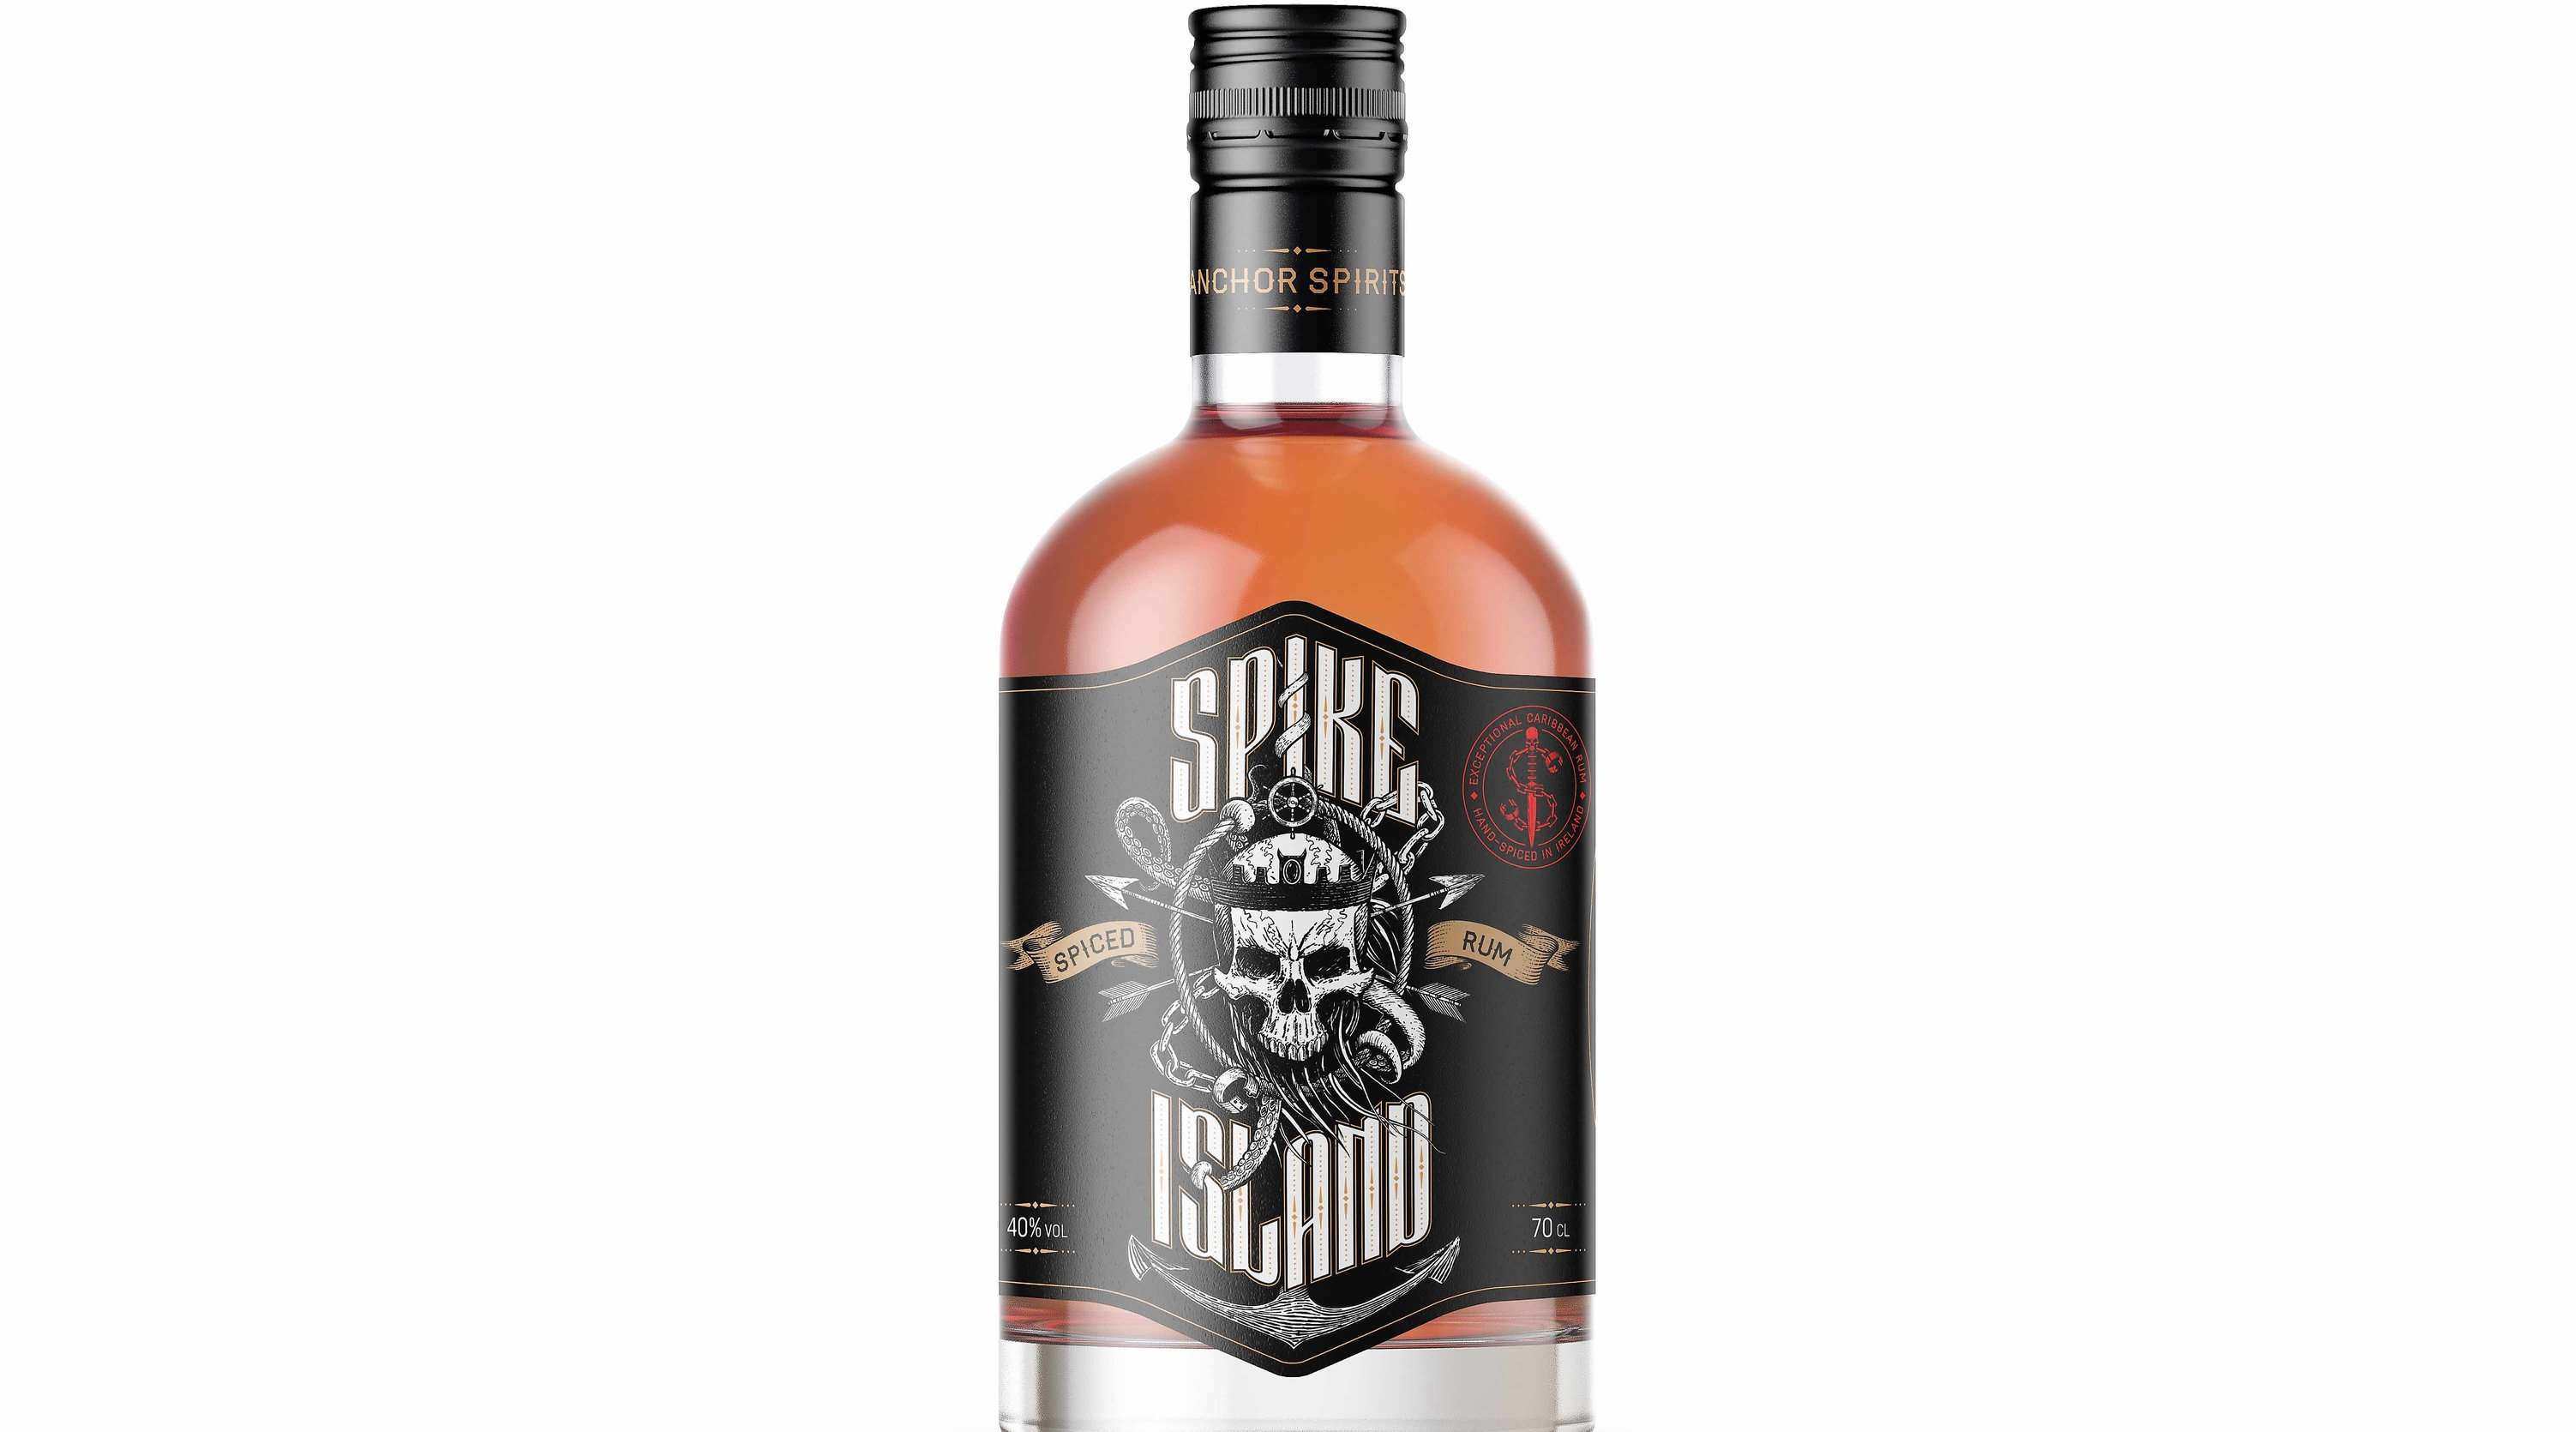 Spike Island Rum is imported at cask strength from the Caribbean and hand-spiced in the barrel before being cut with Irish spring water to bring it to 40% ABV.